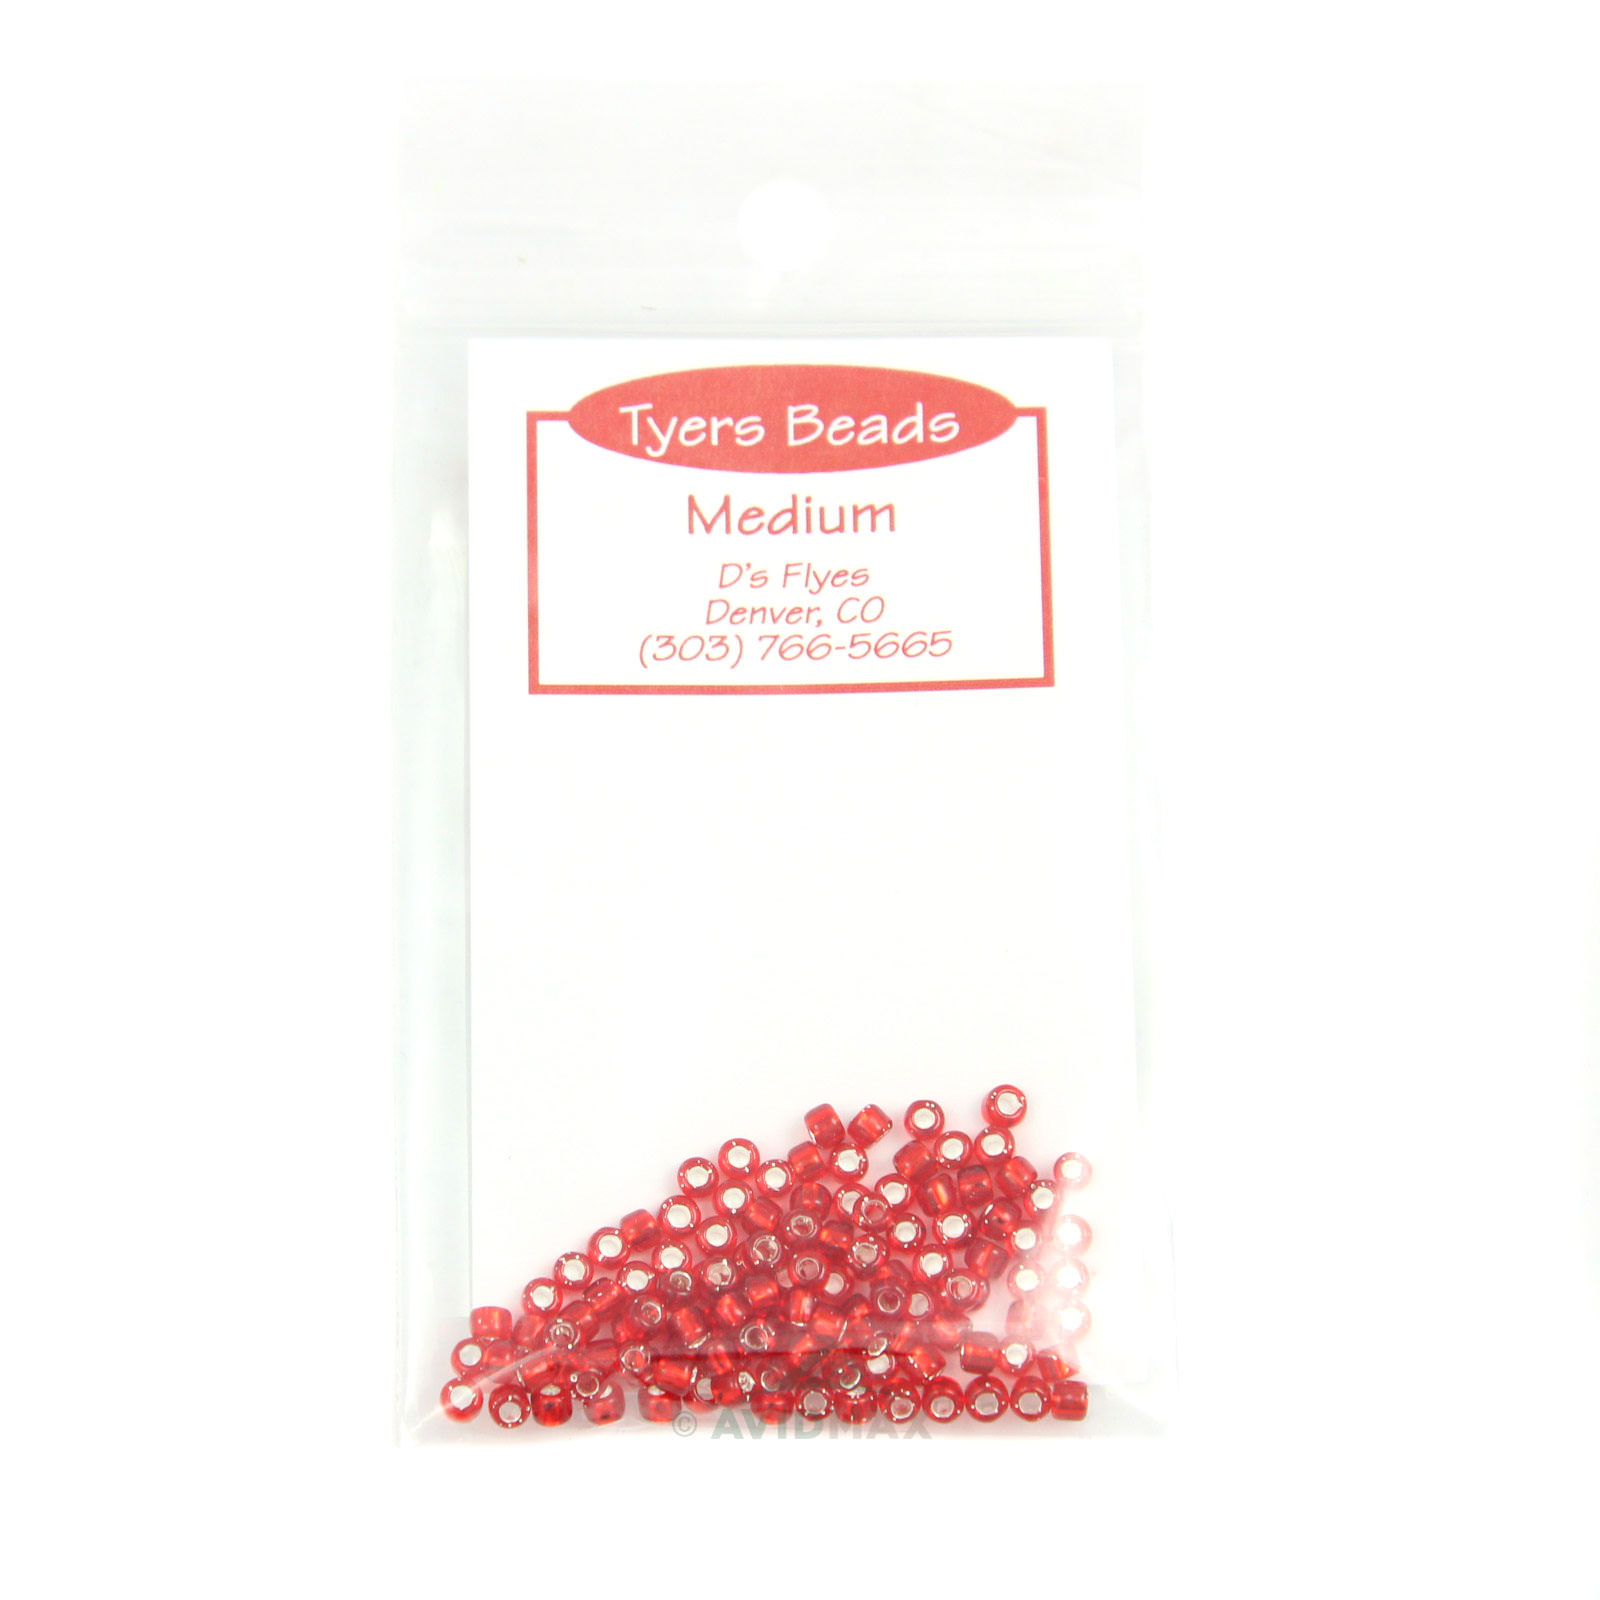 UV Red Metallic Beads | Shiny Red Beads | 8mm size | 1.7mm hole | Christmas  Beads | Valentine Beads | Pack of 50 beads